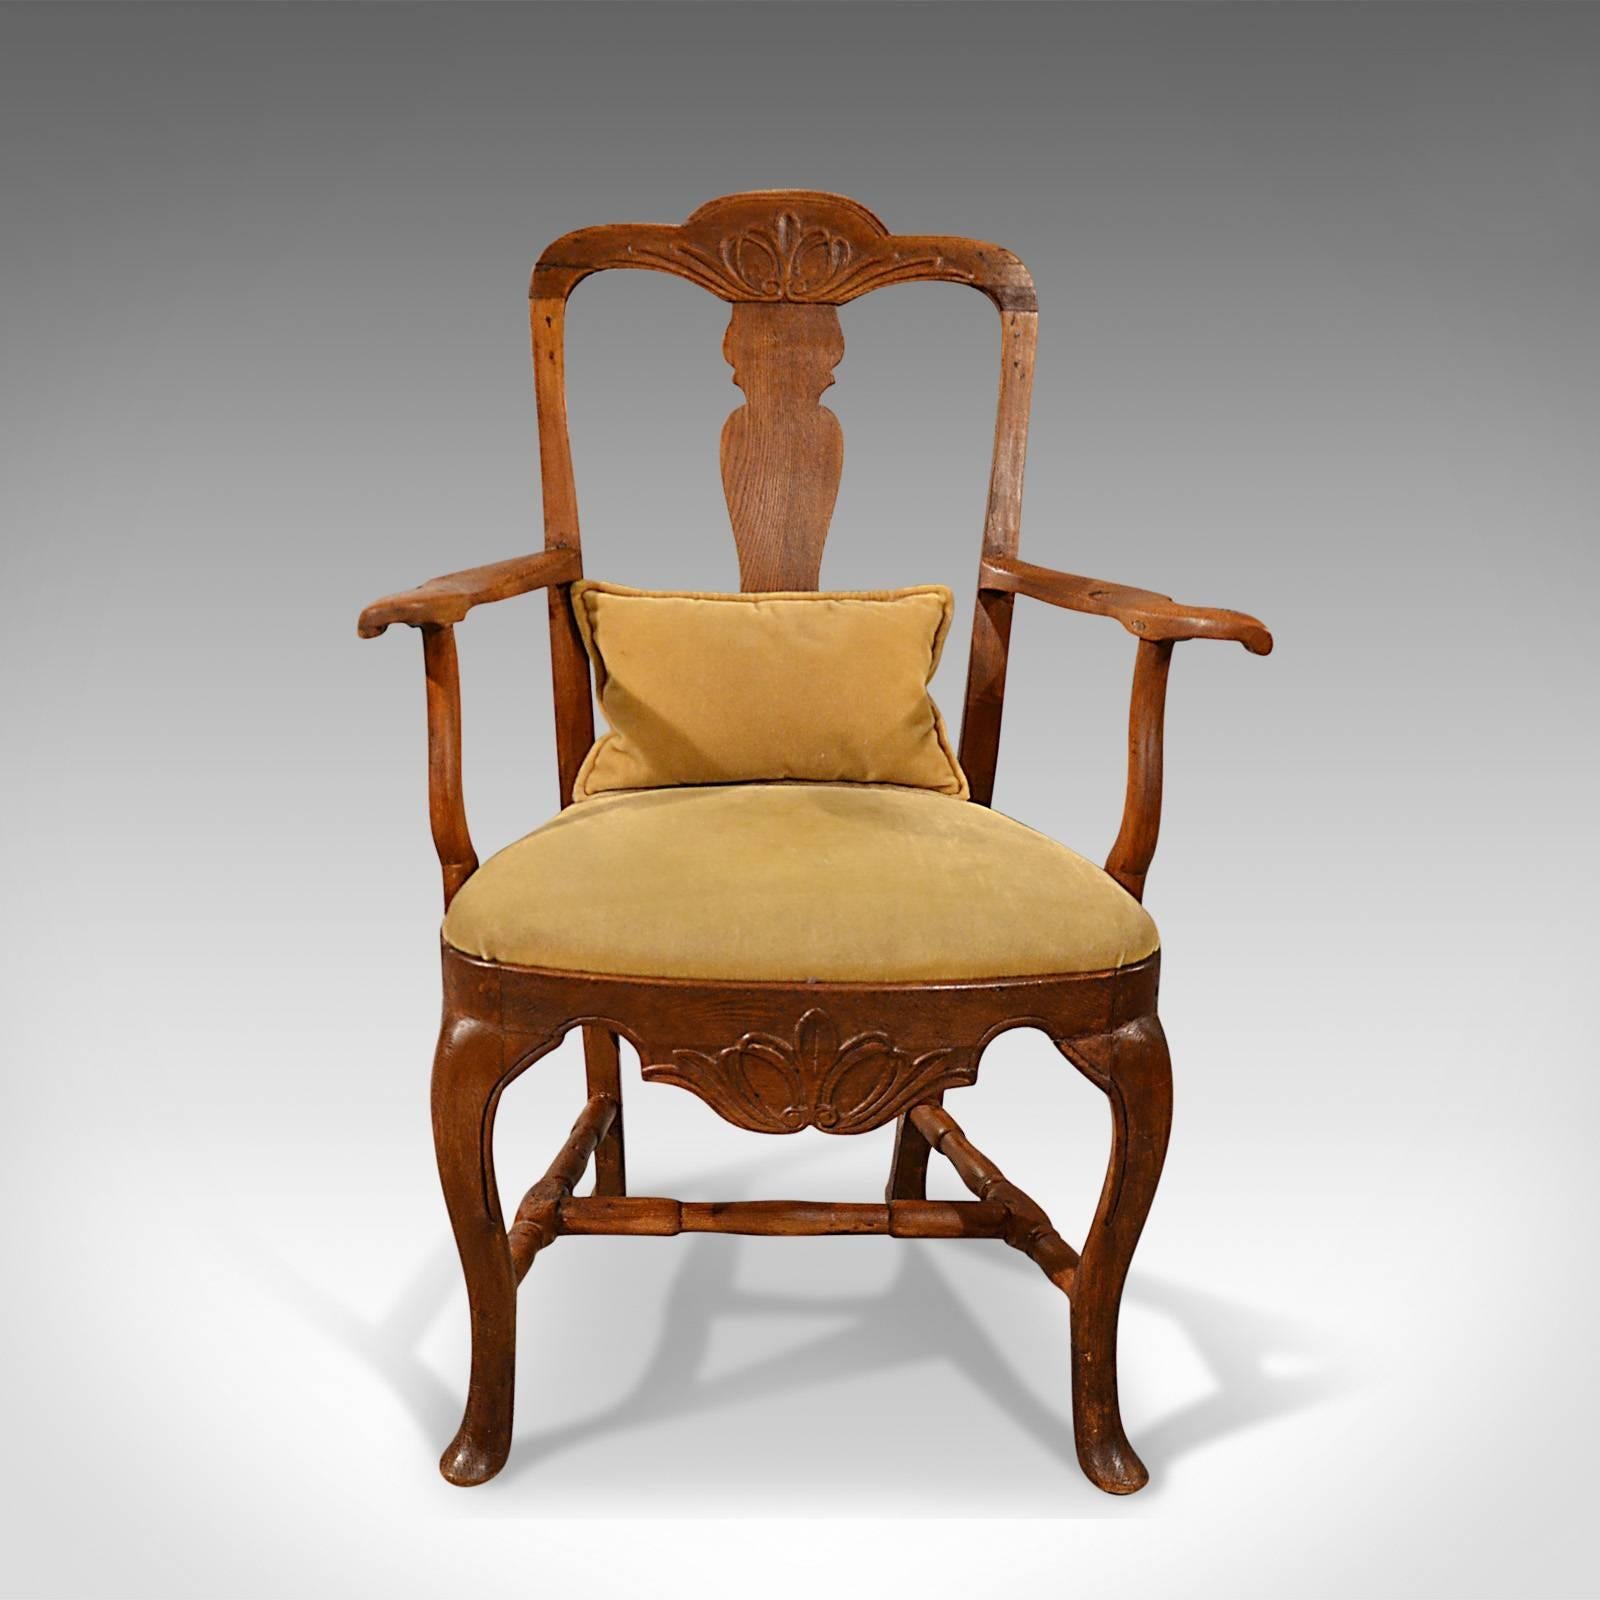 This is an antique elbow chair. A large example in oak, ash and elm ideal as a study desk chair. A Georgian armchair dating to circa 1800.

A superior antique chair presented in very good condition
In oak, ash and elm with fine color